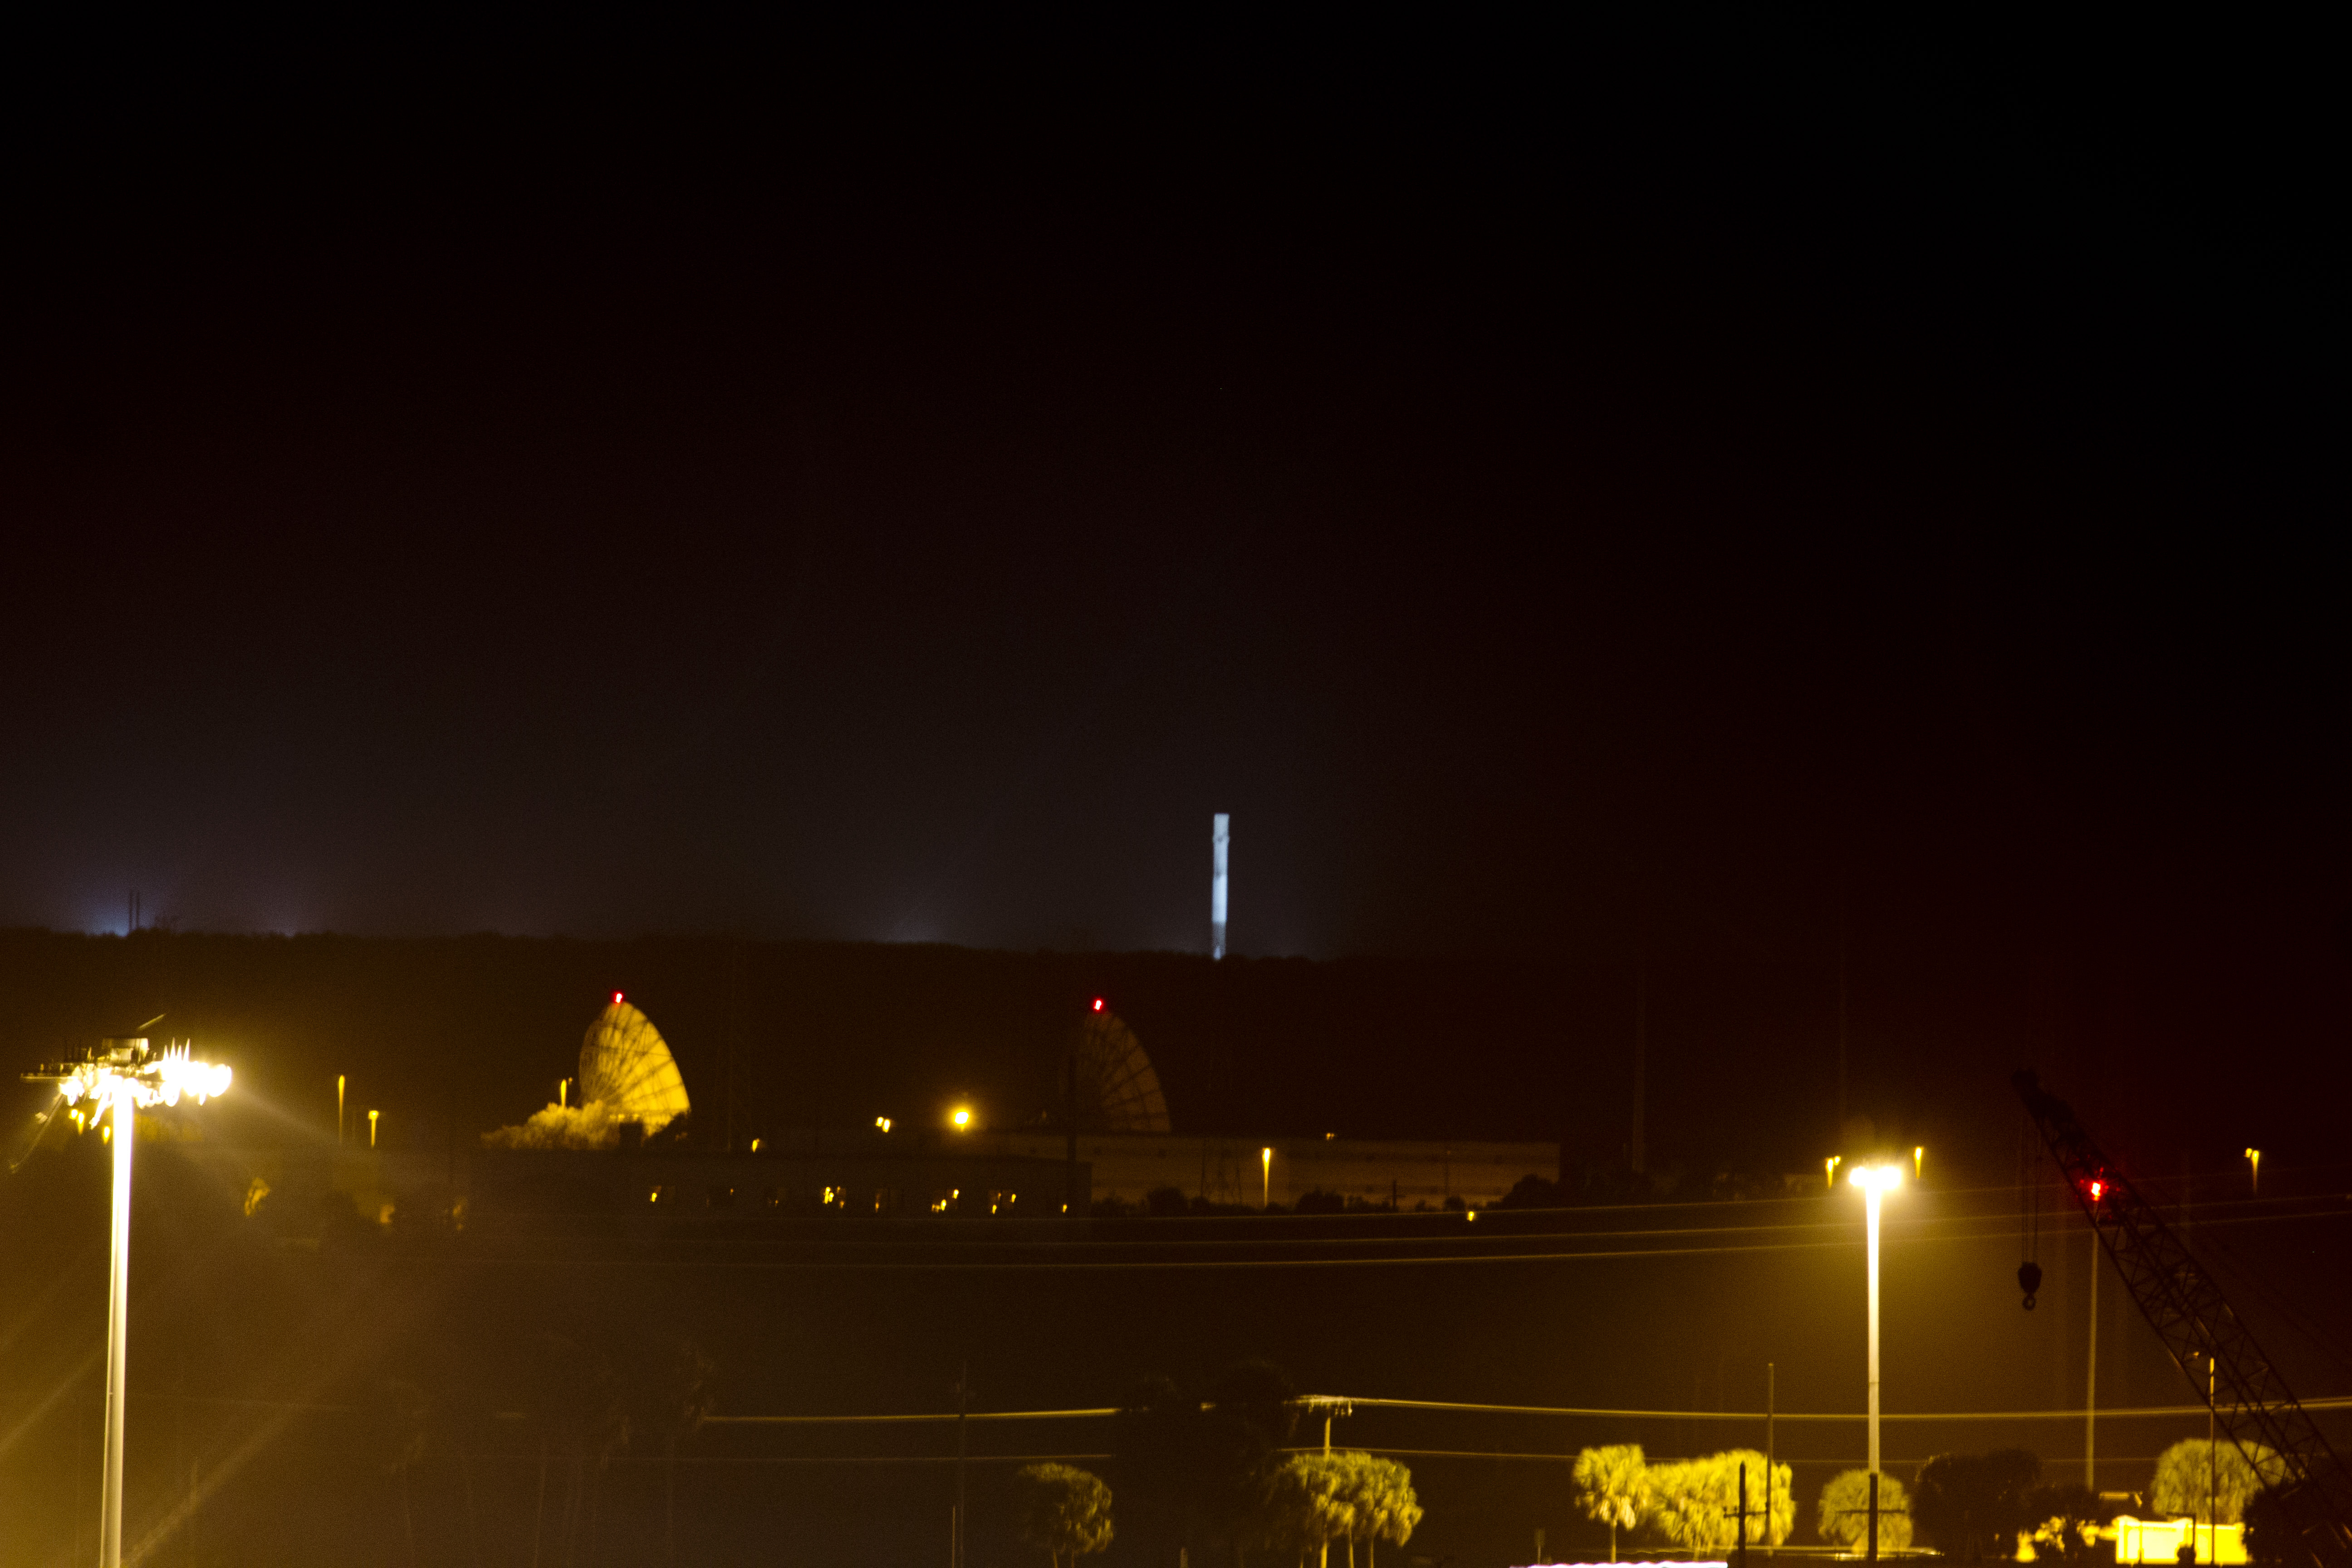 Touchdown view of SpaceX Falcon 9 rocket at Landing Zone 1 at Cape Canaveral, Fla. on Dec. 21, 2015 as seen from atop Exploration Tower.  Credit: Jeff Seibert/AmericaSpace 